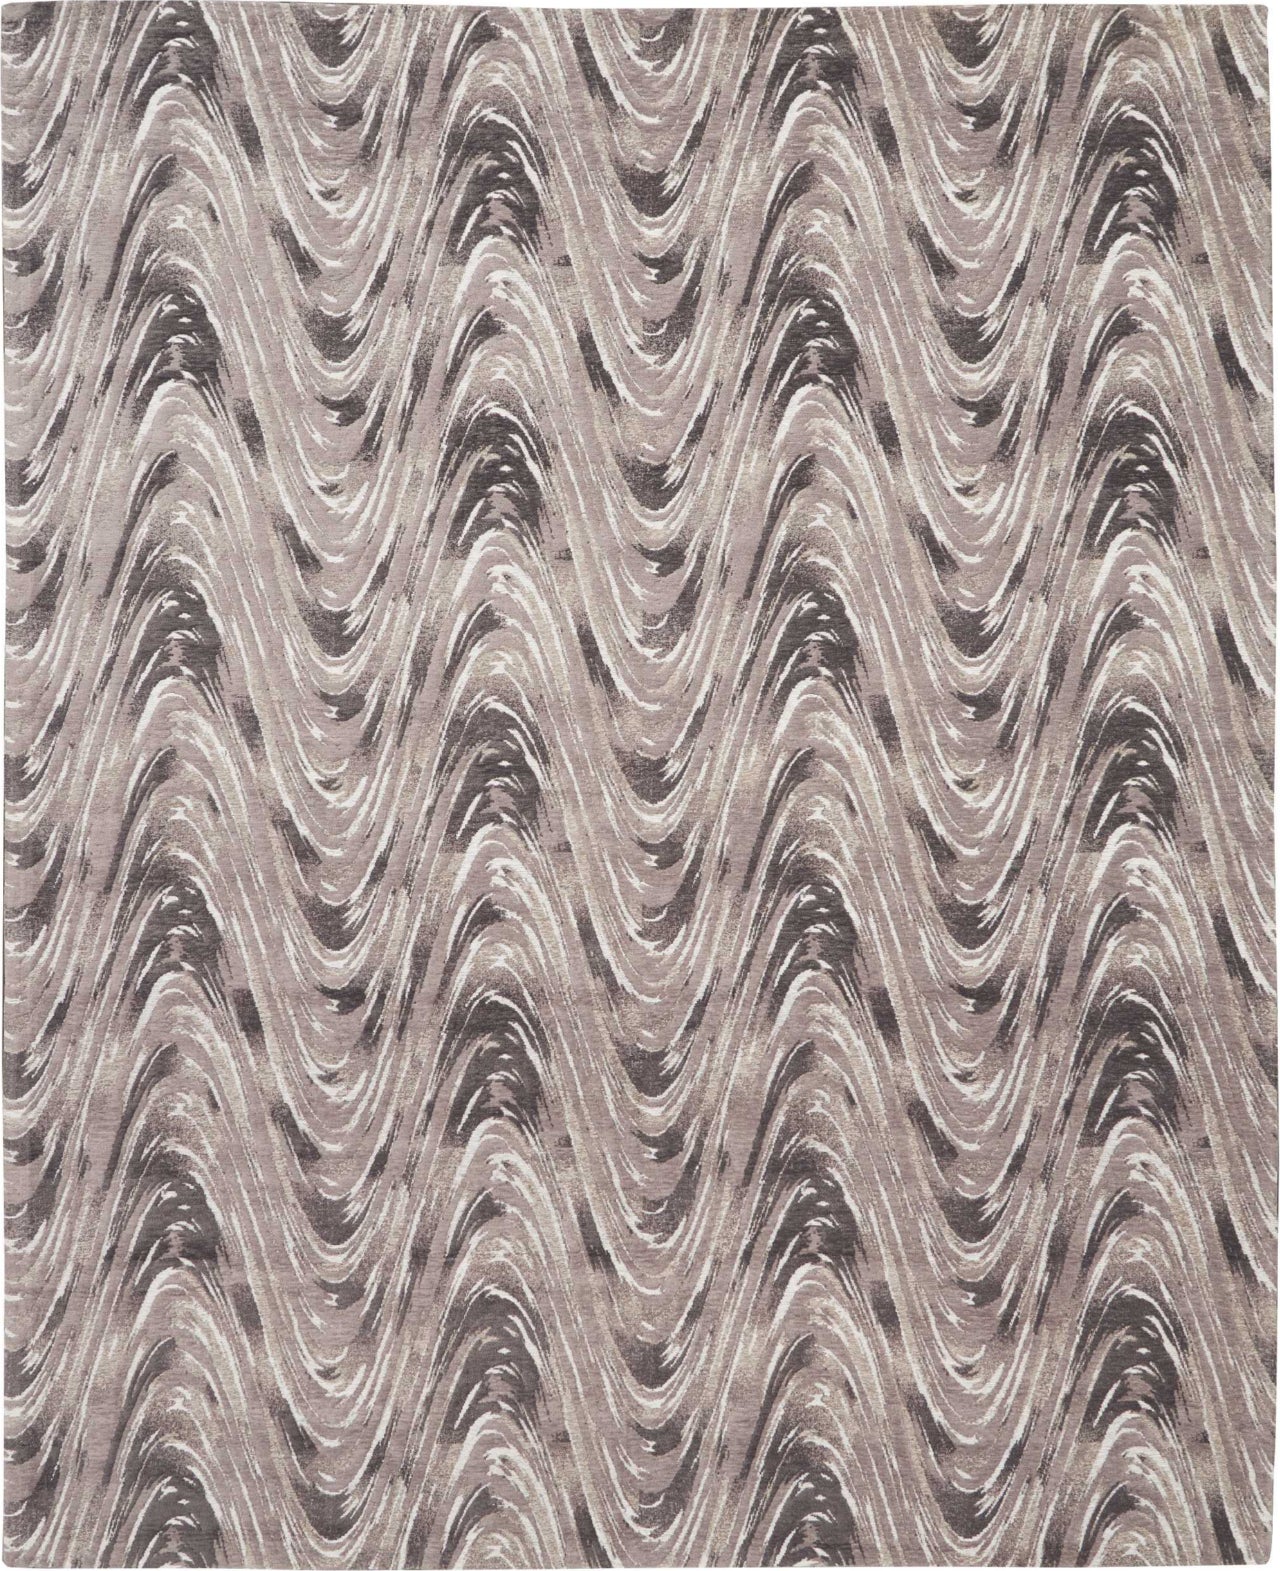 Nourison Studio Nyc Collection OM001 Charcoal Area Rug by Design